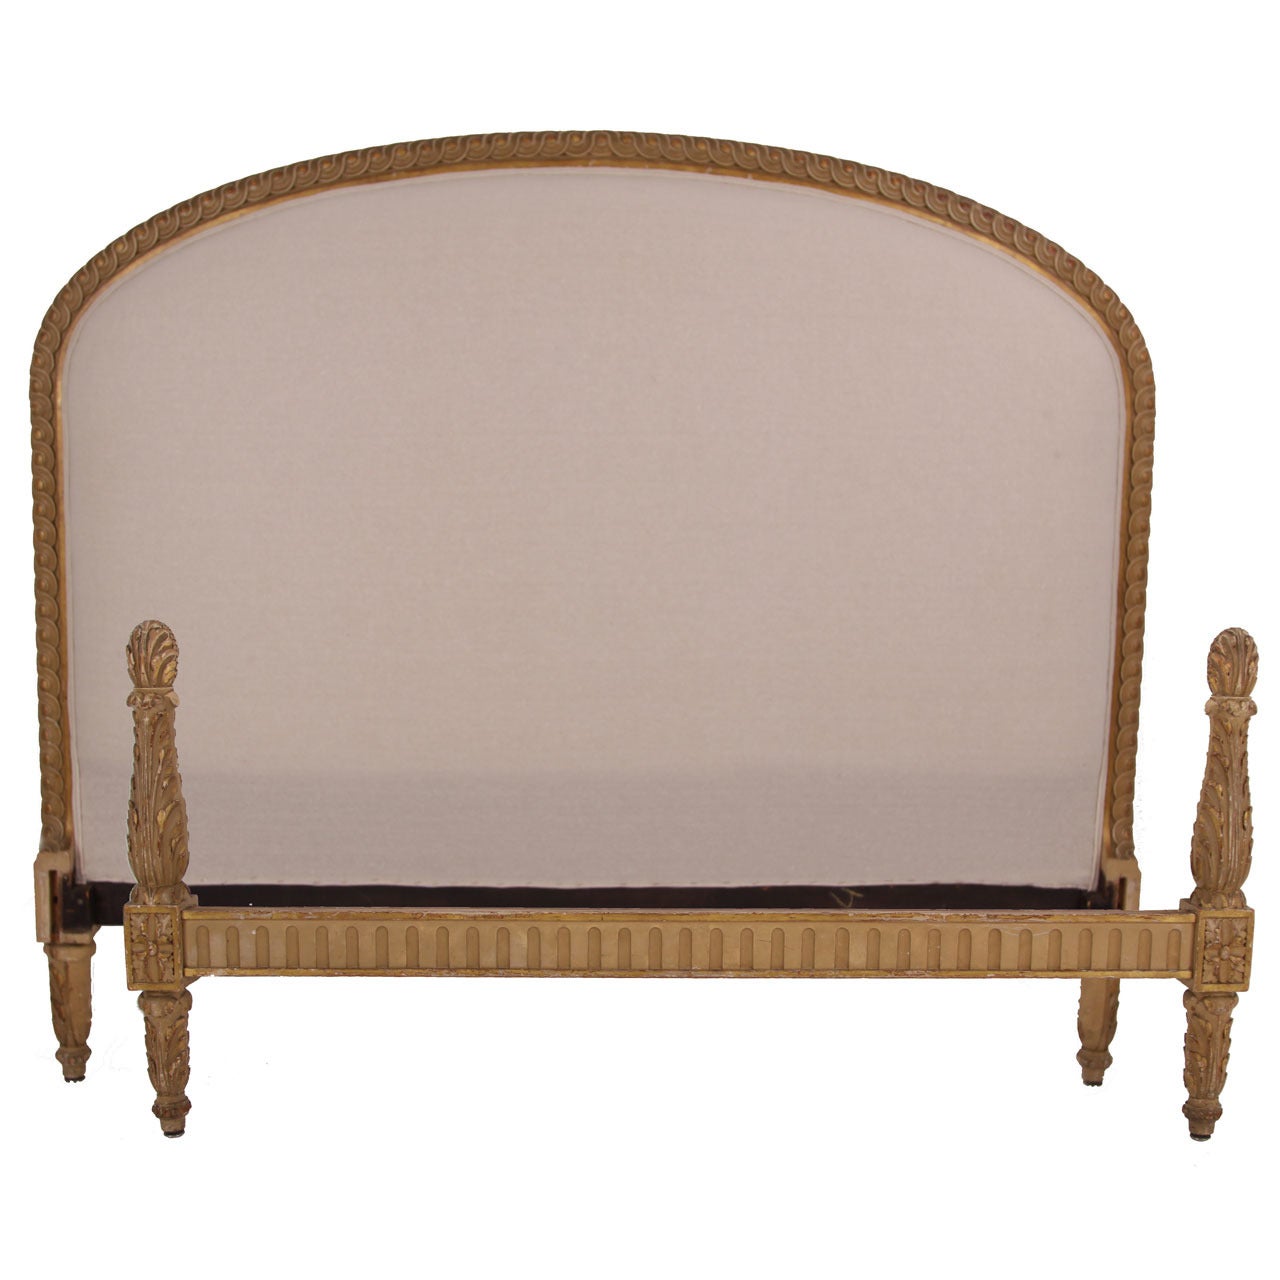 Antique French Bed - Headboard, Footboard, Siderails For Sale